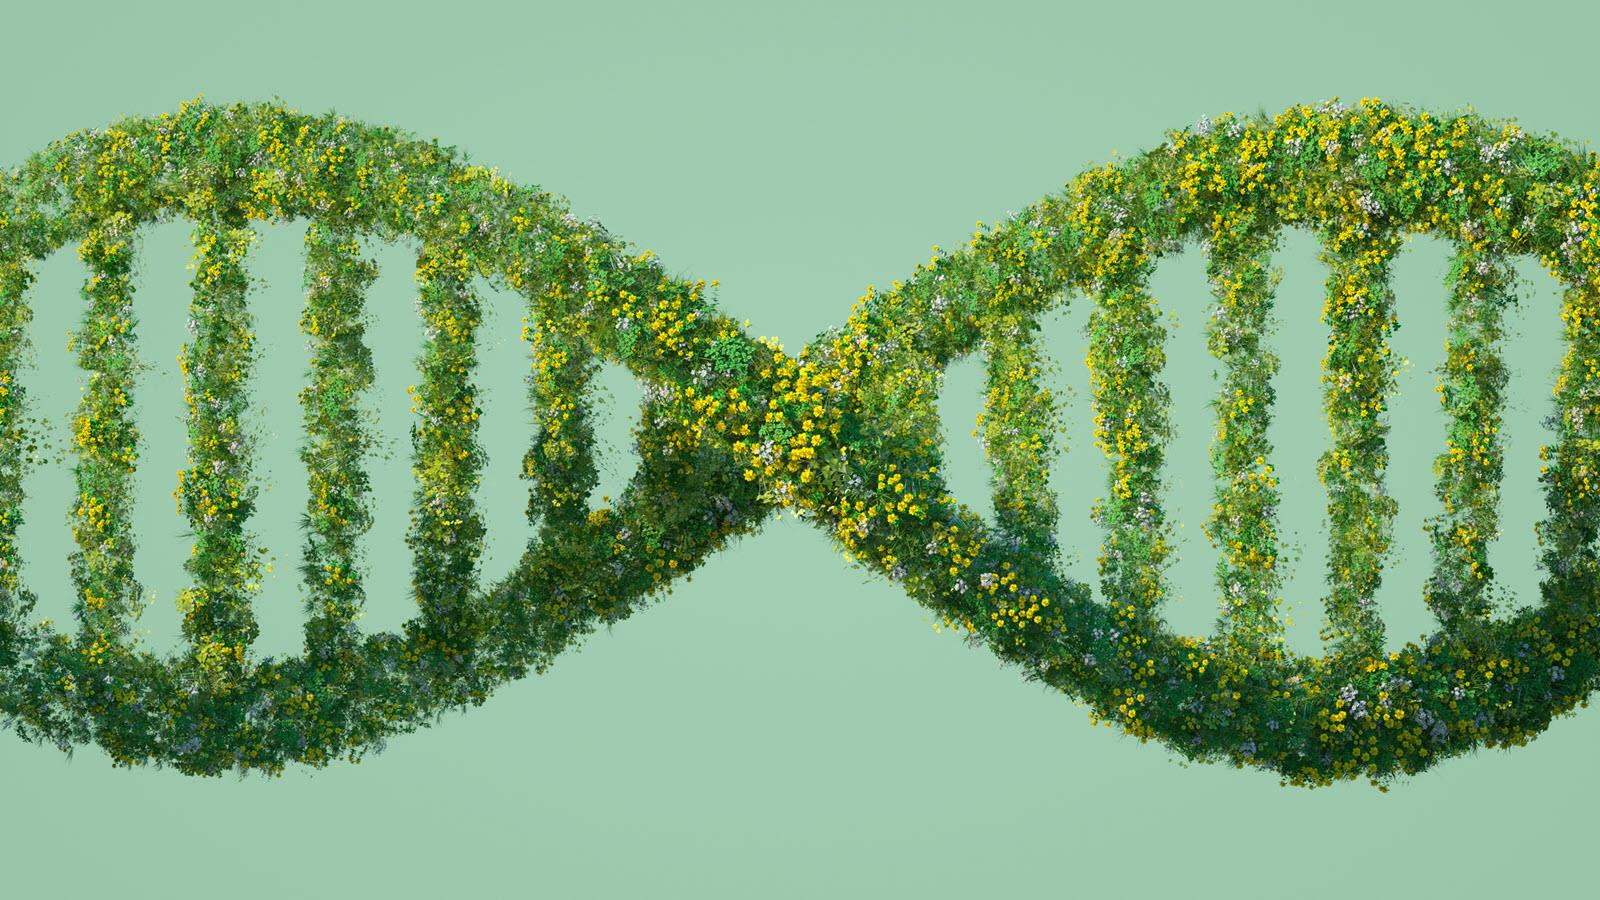 green illustration of a DNA strand made of plants and flowers